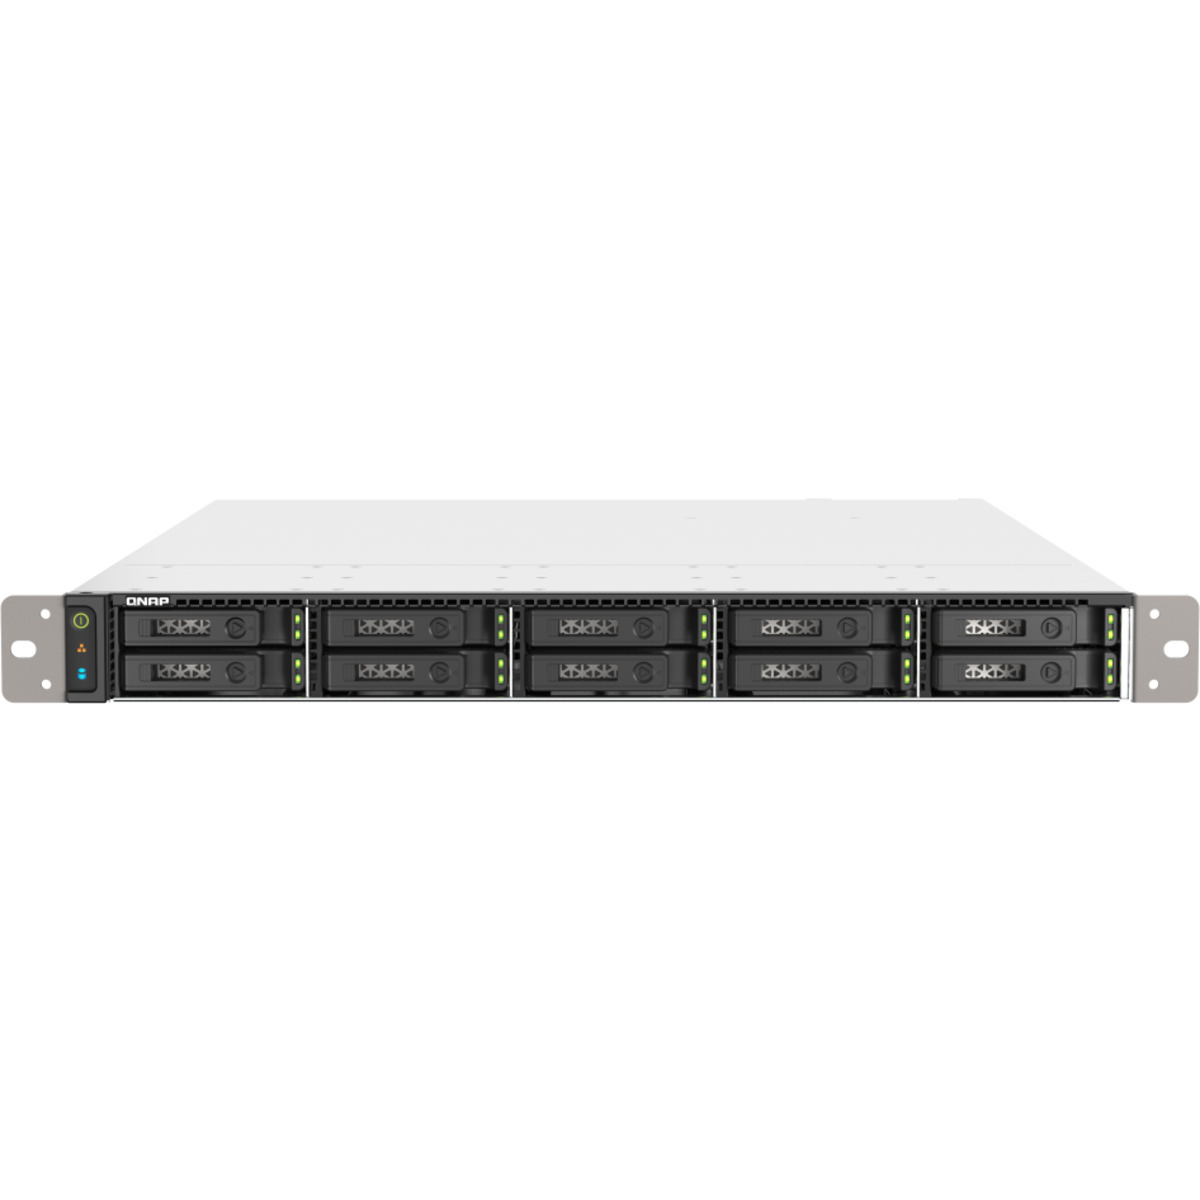 QNAP TS-h1090FU-7232P 7tb 10-Bay RackMount Large Business / Enterprise NAS - Network Attached Storage Device 7x1tb Crucial P3 Plus CT1000P3PSSD8  5000/3600MB/s M.2 2280 NVMe SSD CONSUMER Class Drives Installed - Burn-In Tested TS-h1090FU-7232P